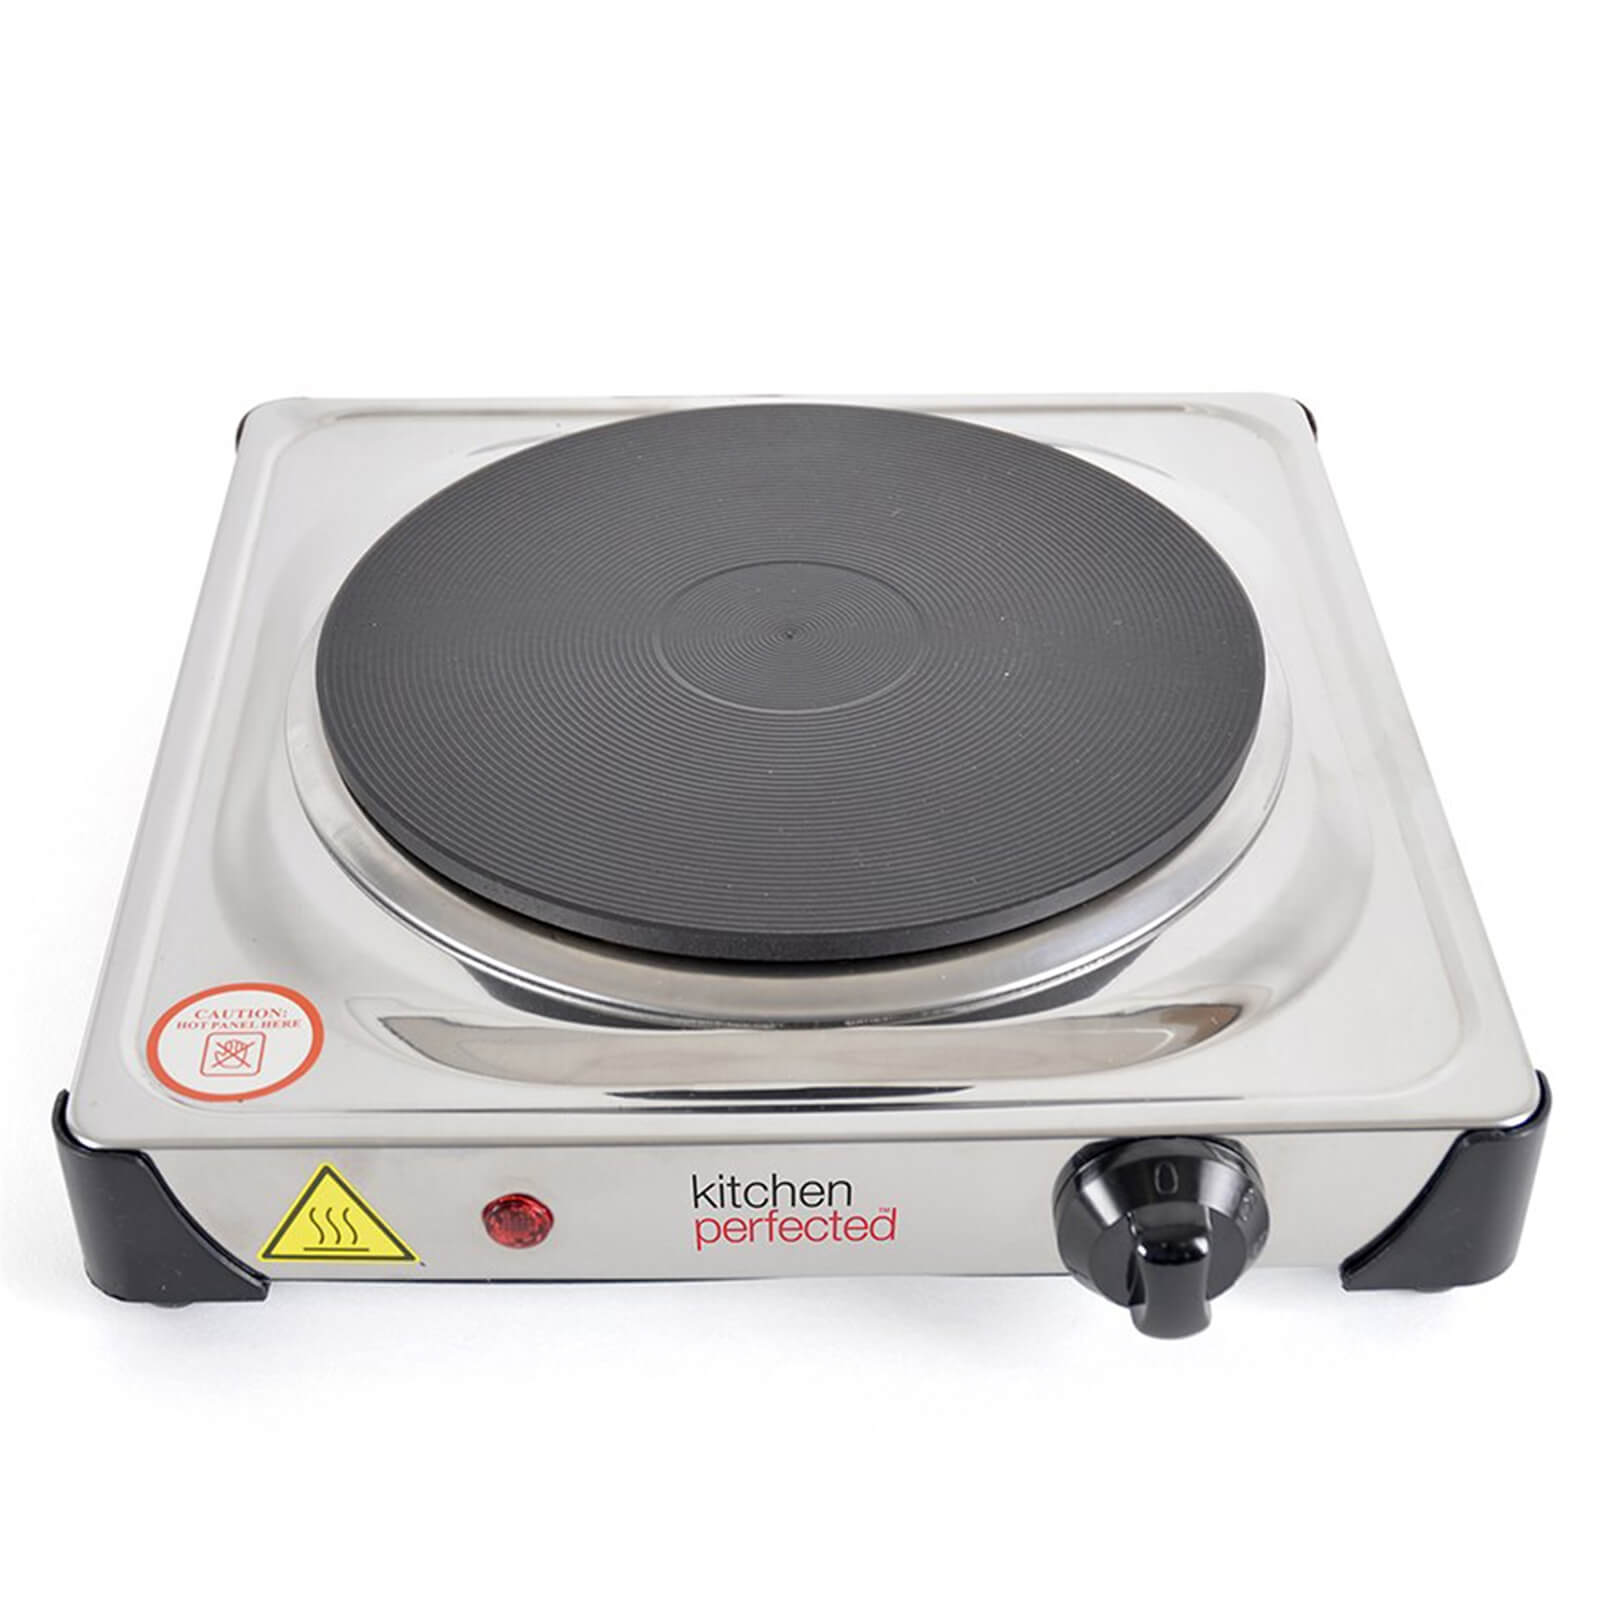 Kitchen Perfected 1500w Single Hotplate SS.